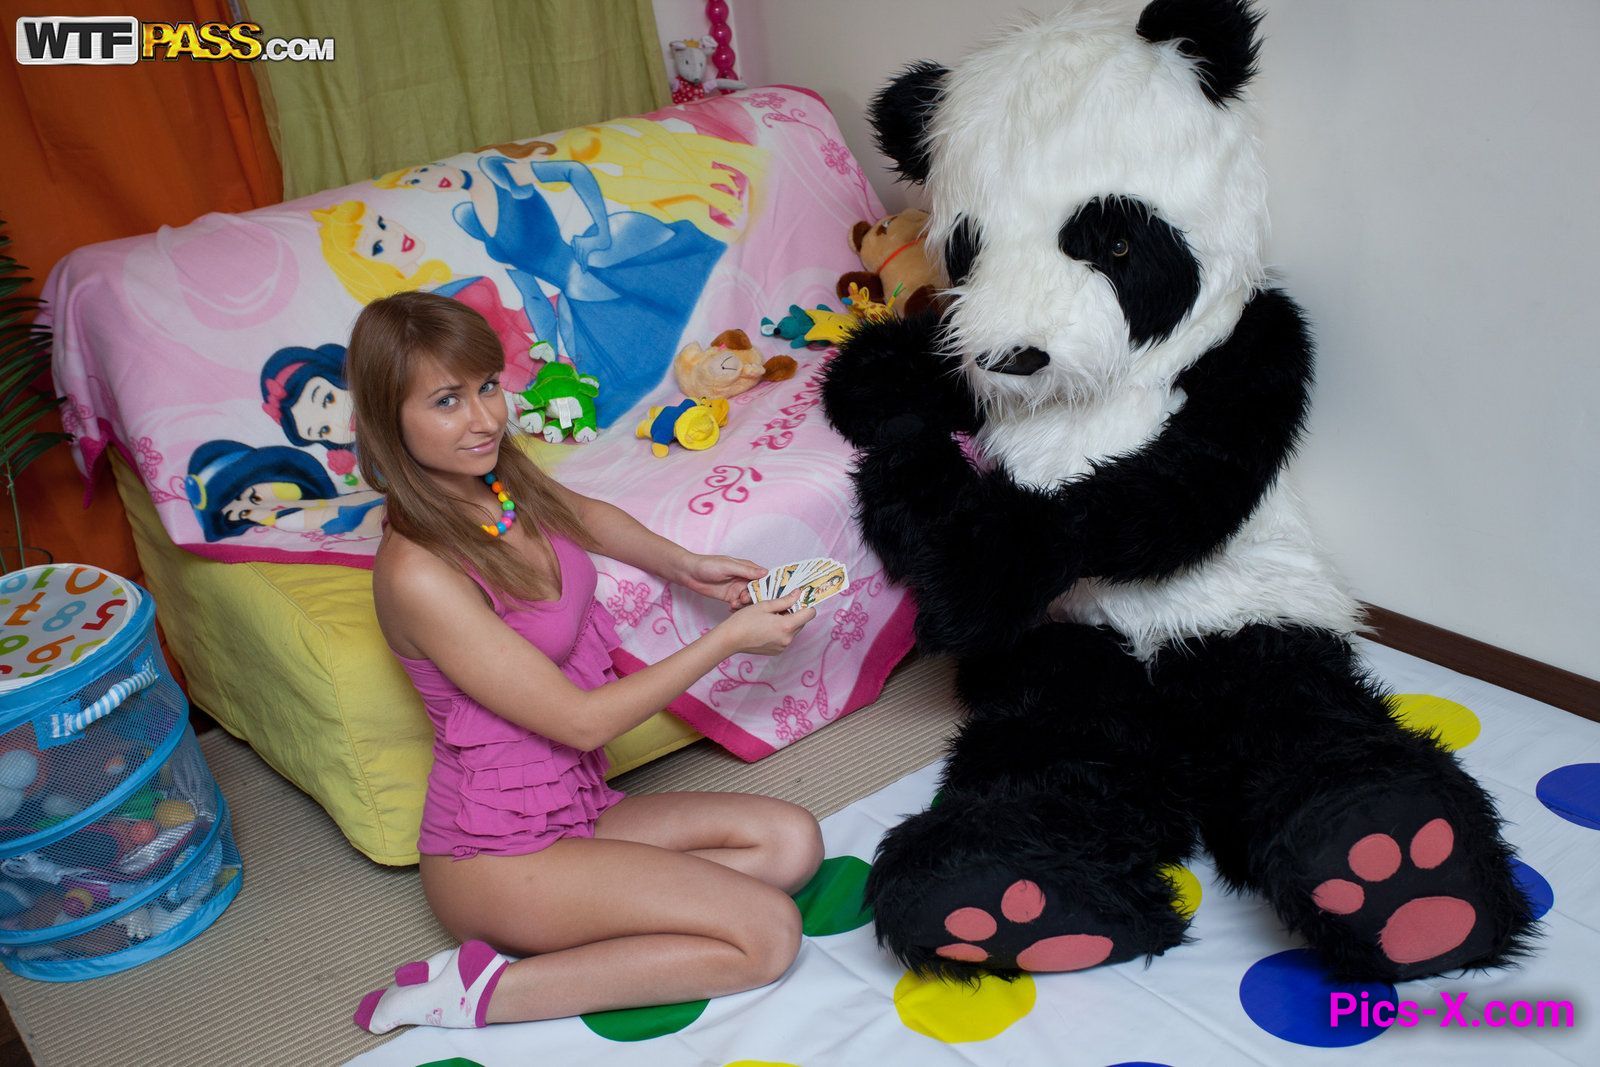 Chick plays with unusual sex toy - Panda Fuck - Image 19